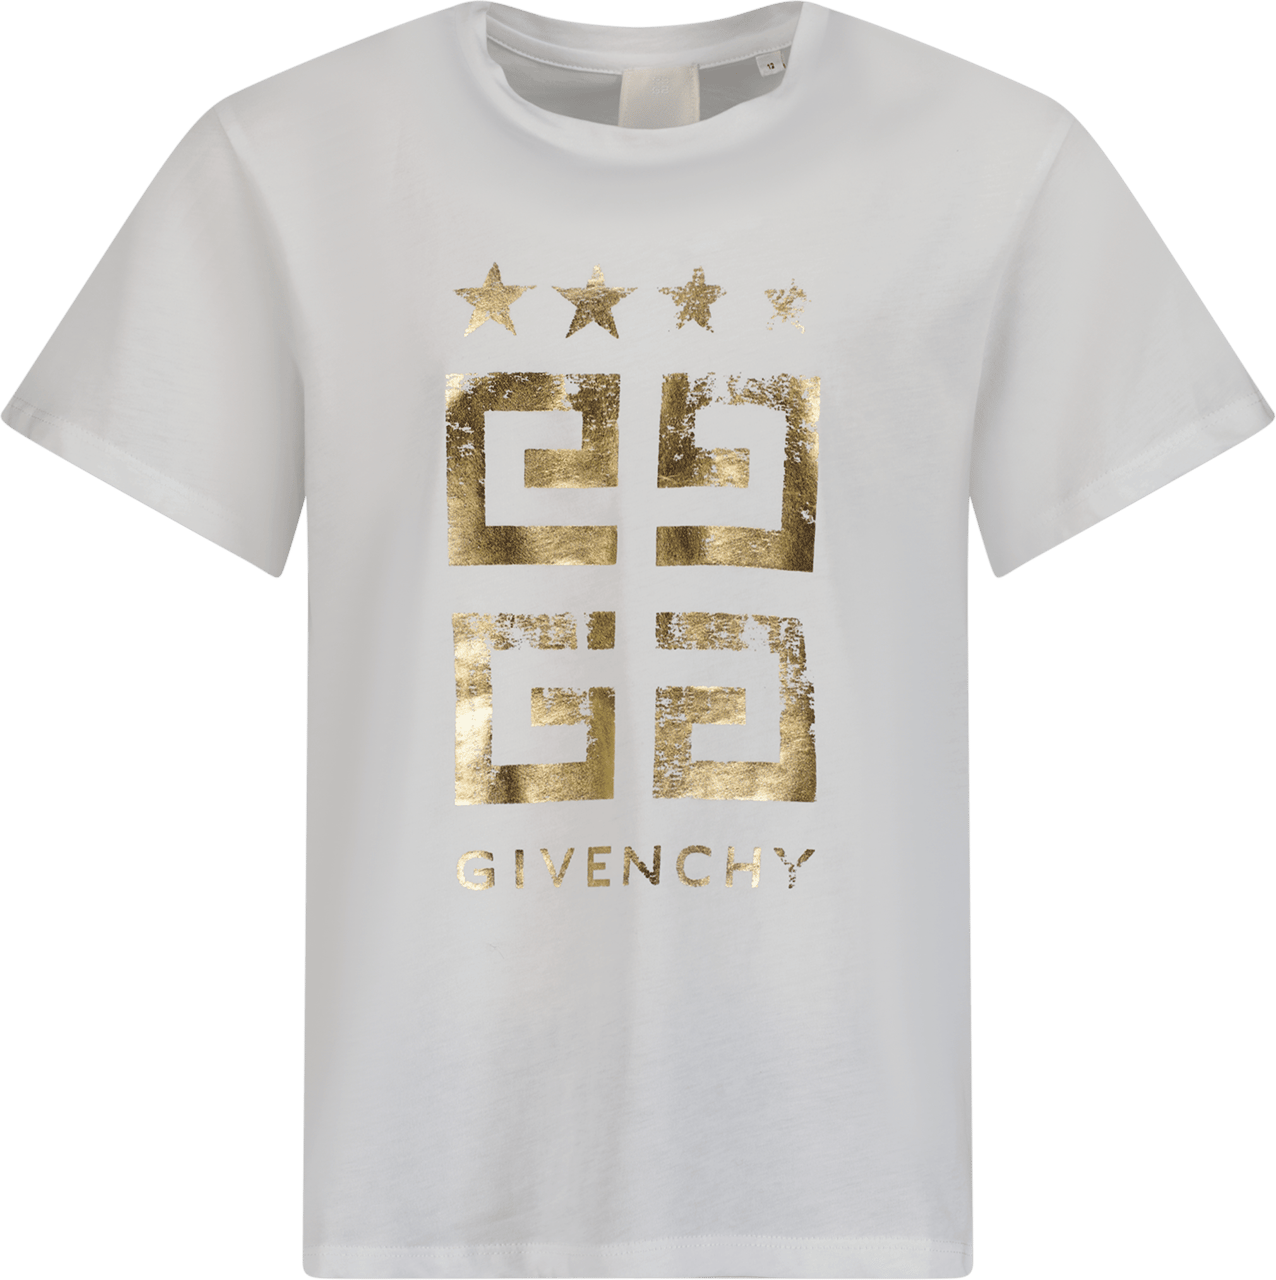 Givenchy Givenchy Kinder Meisjes T-Shirt Wit Wit